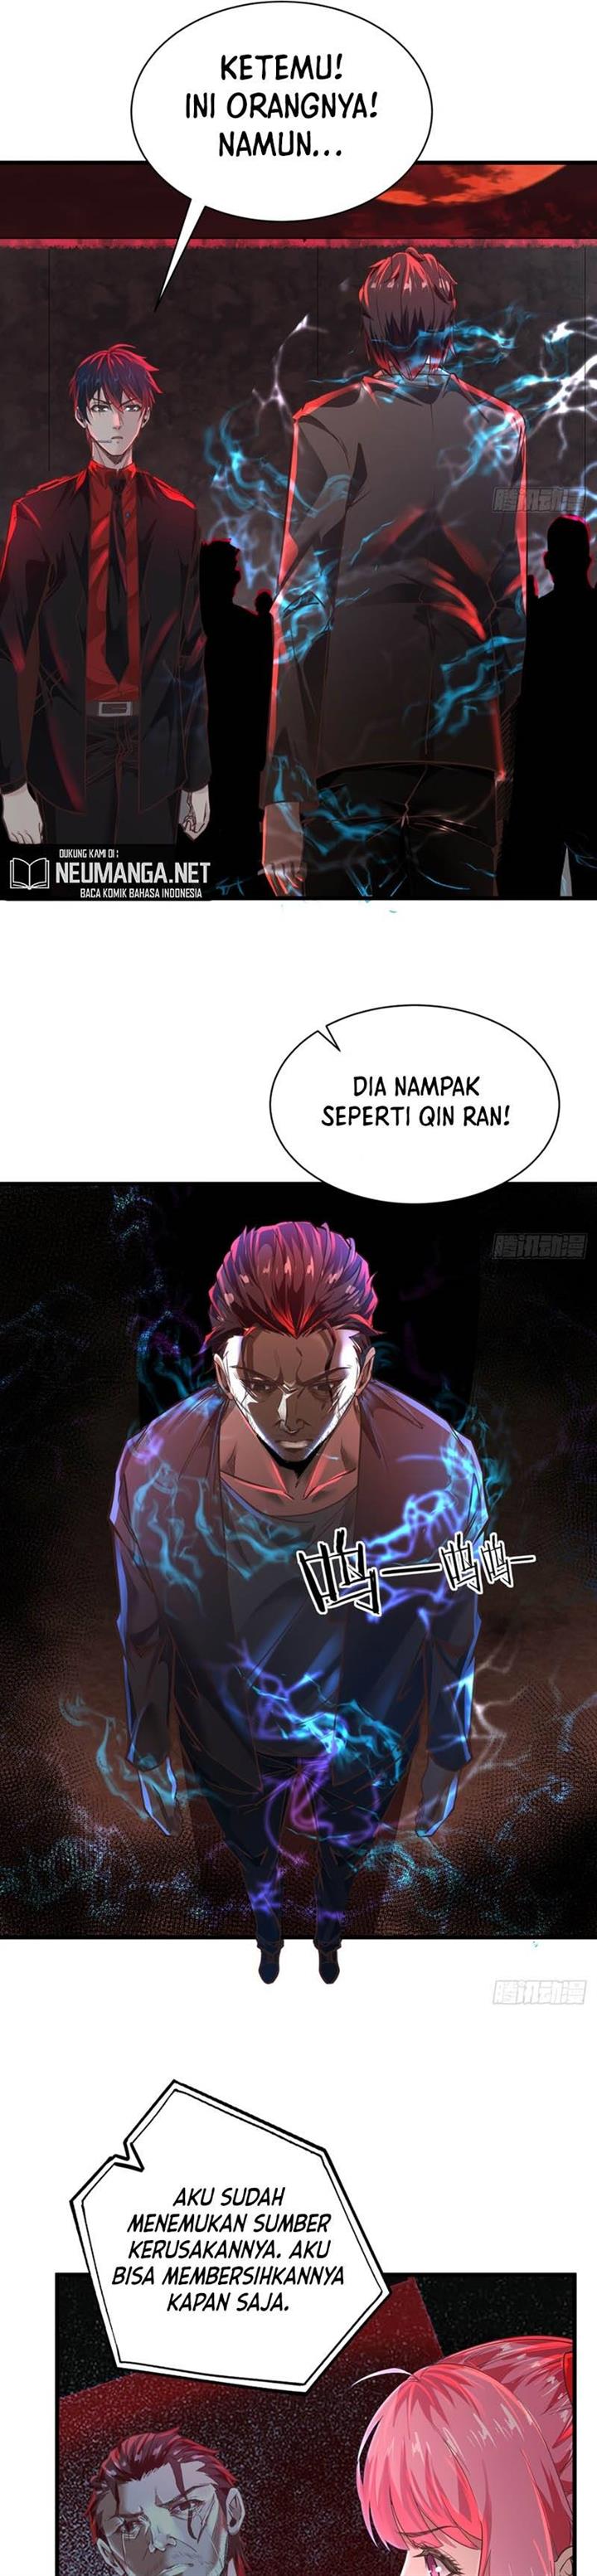 Since The Red Moon Appeared Chapter 46